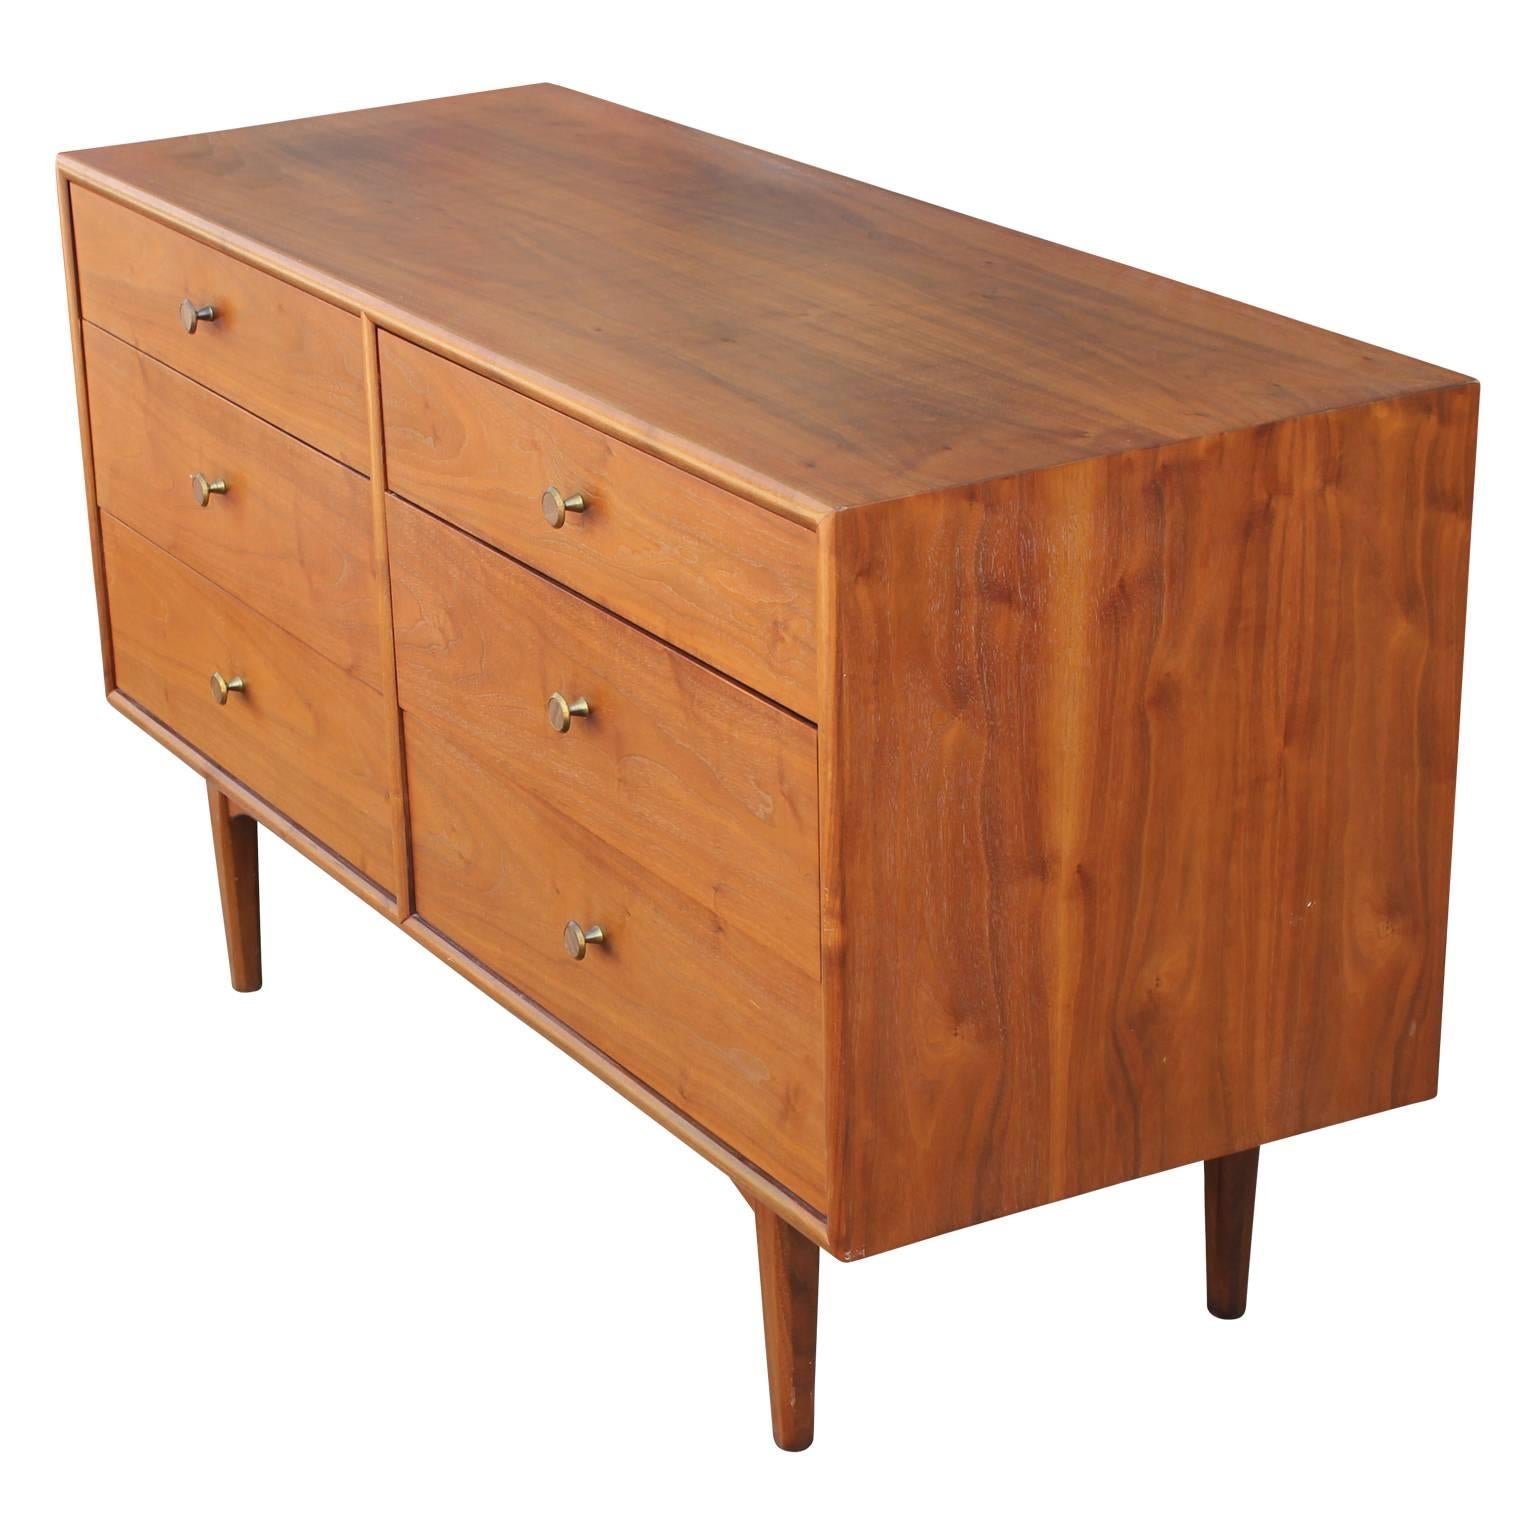 Iconic Drexel declaration walnut six-drawer dresser designed by Kipp Stewart and Stewart McDougall. Features brass and faux bamboo pulls. Beautiful addition to any modern or mid-mod space.